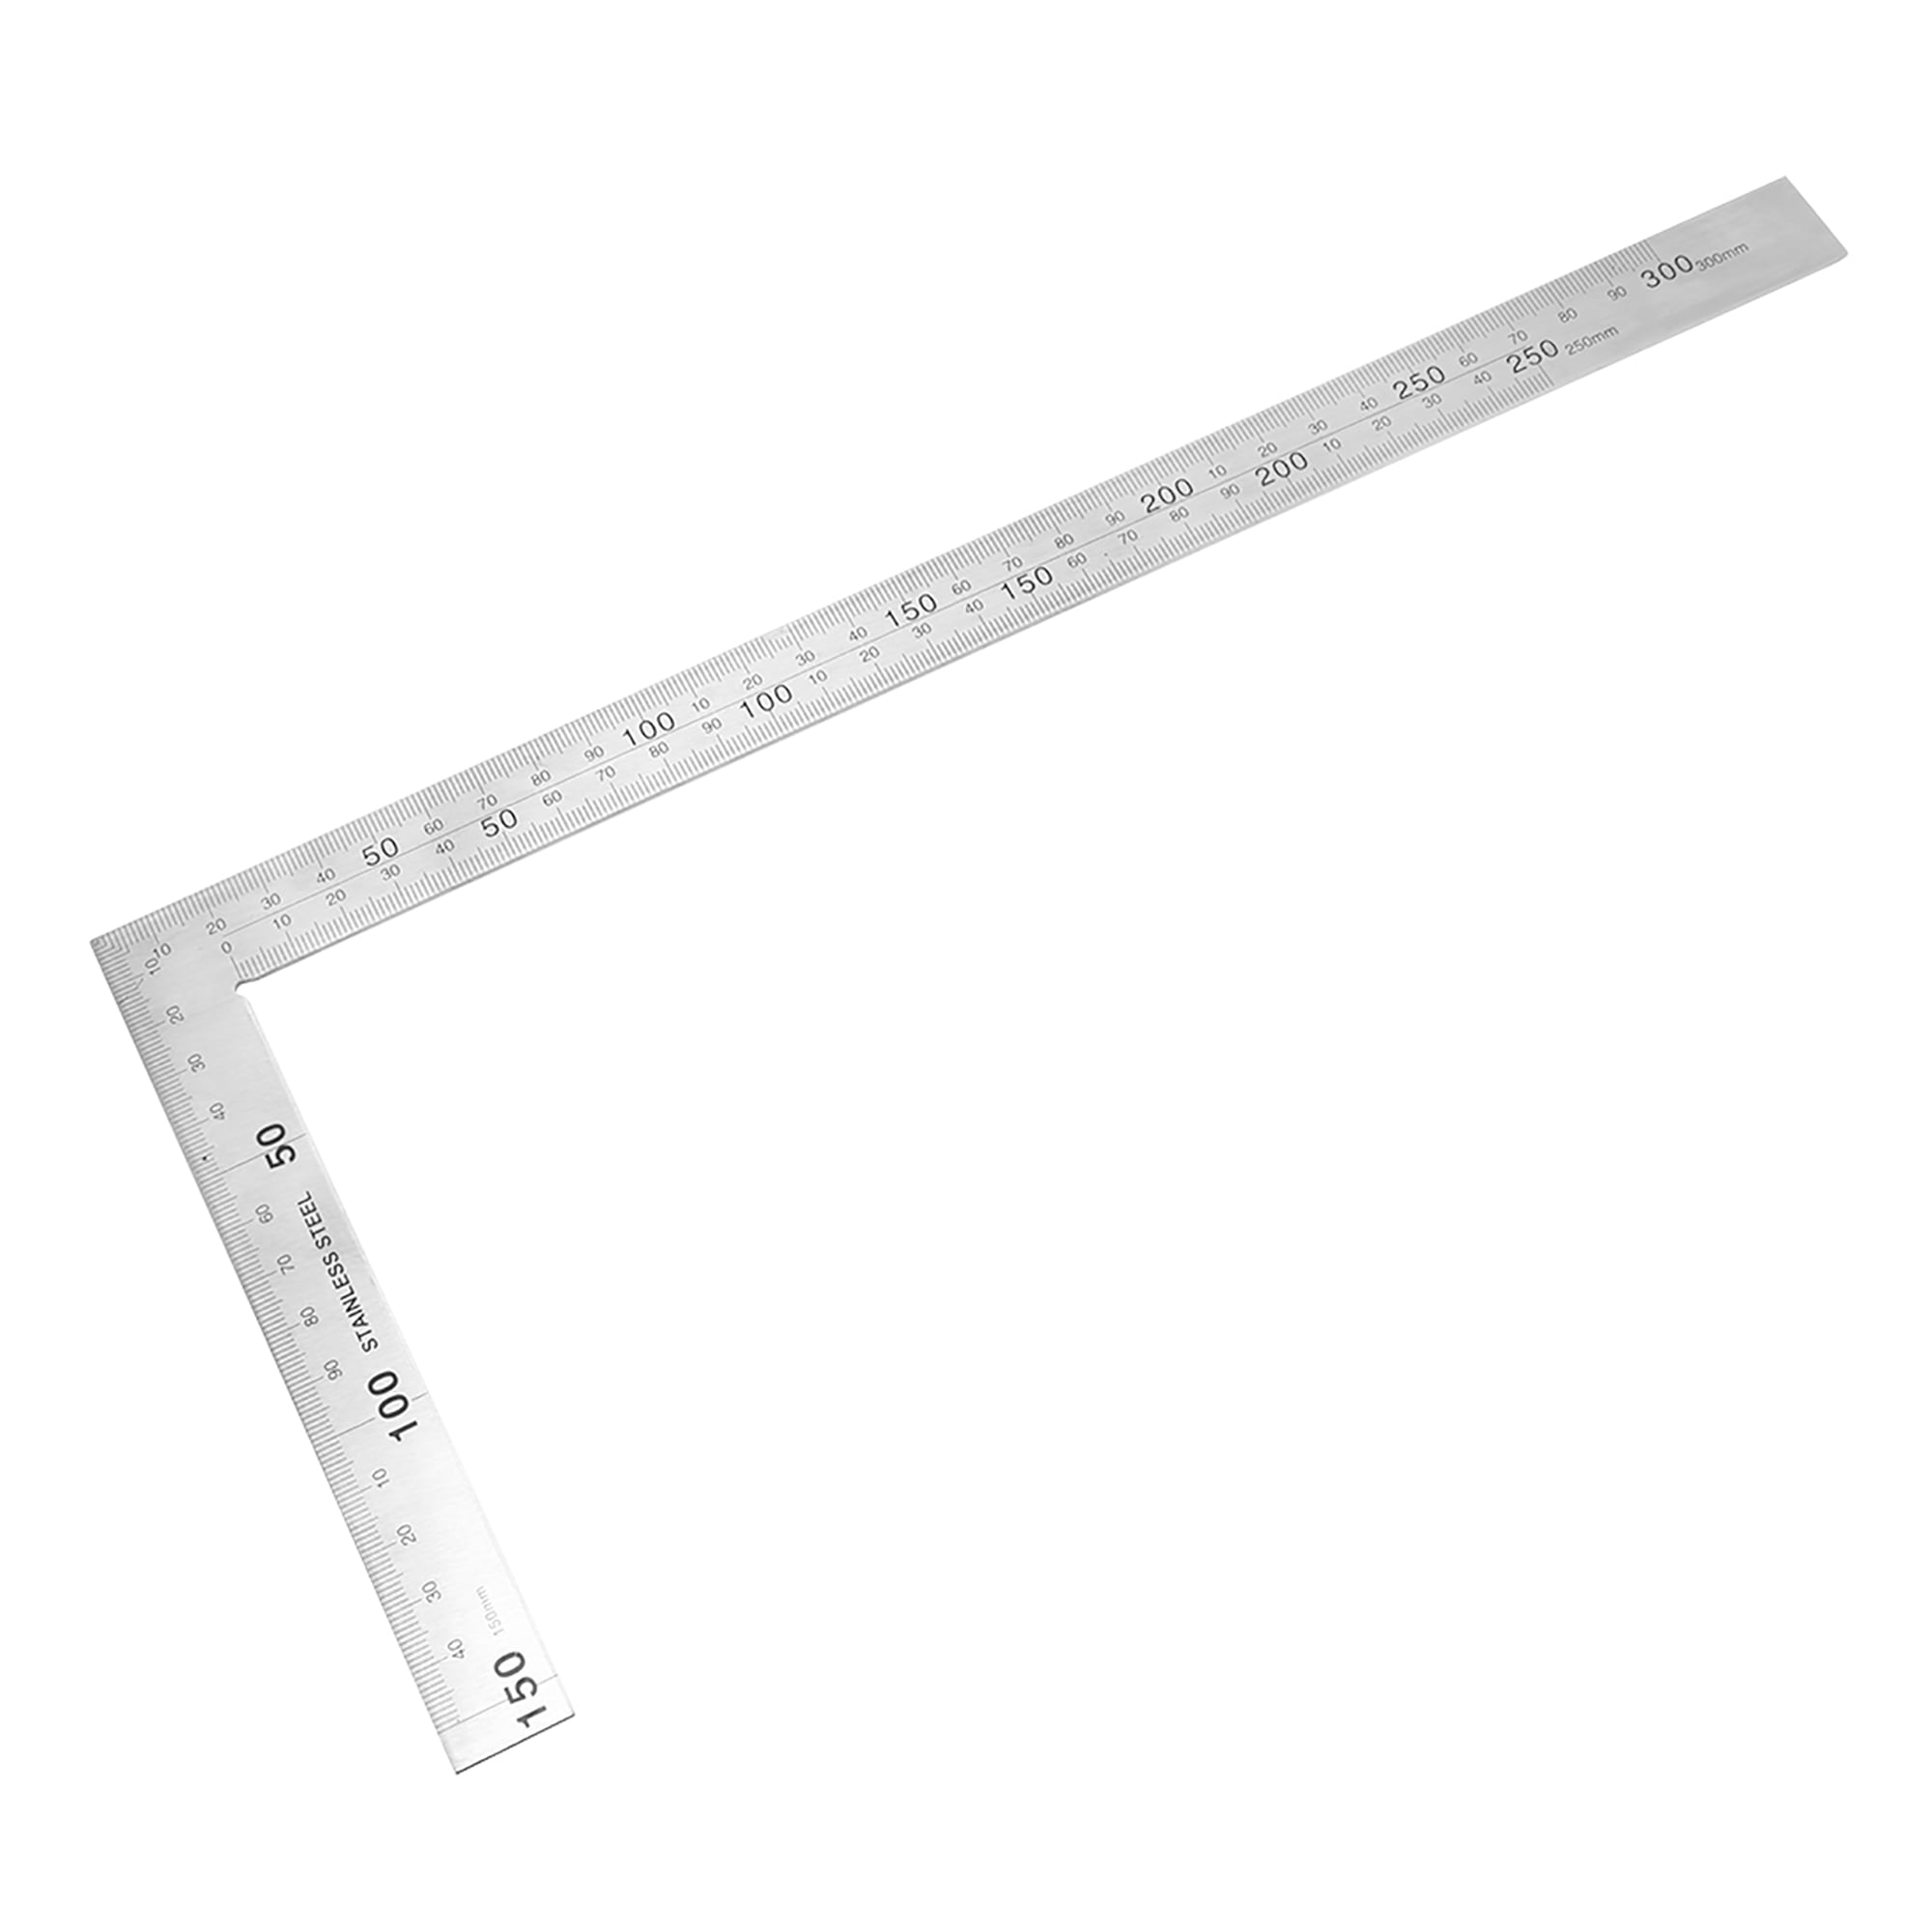 36" STEEL TRY SQUARE PRECISION RIGHT ANGLE MEASURE MARKING TOOL ENGINEERS 